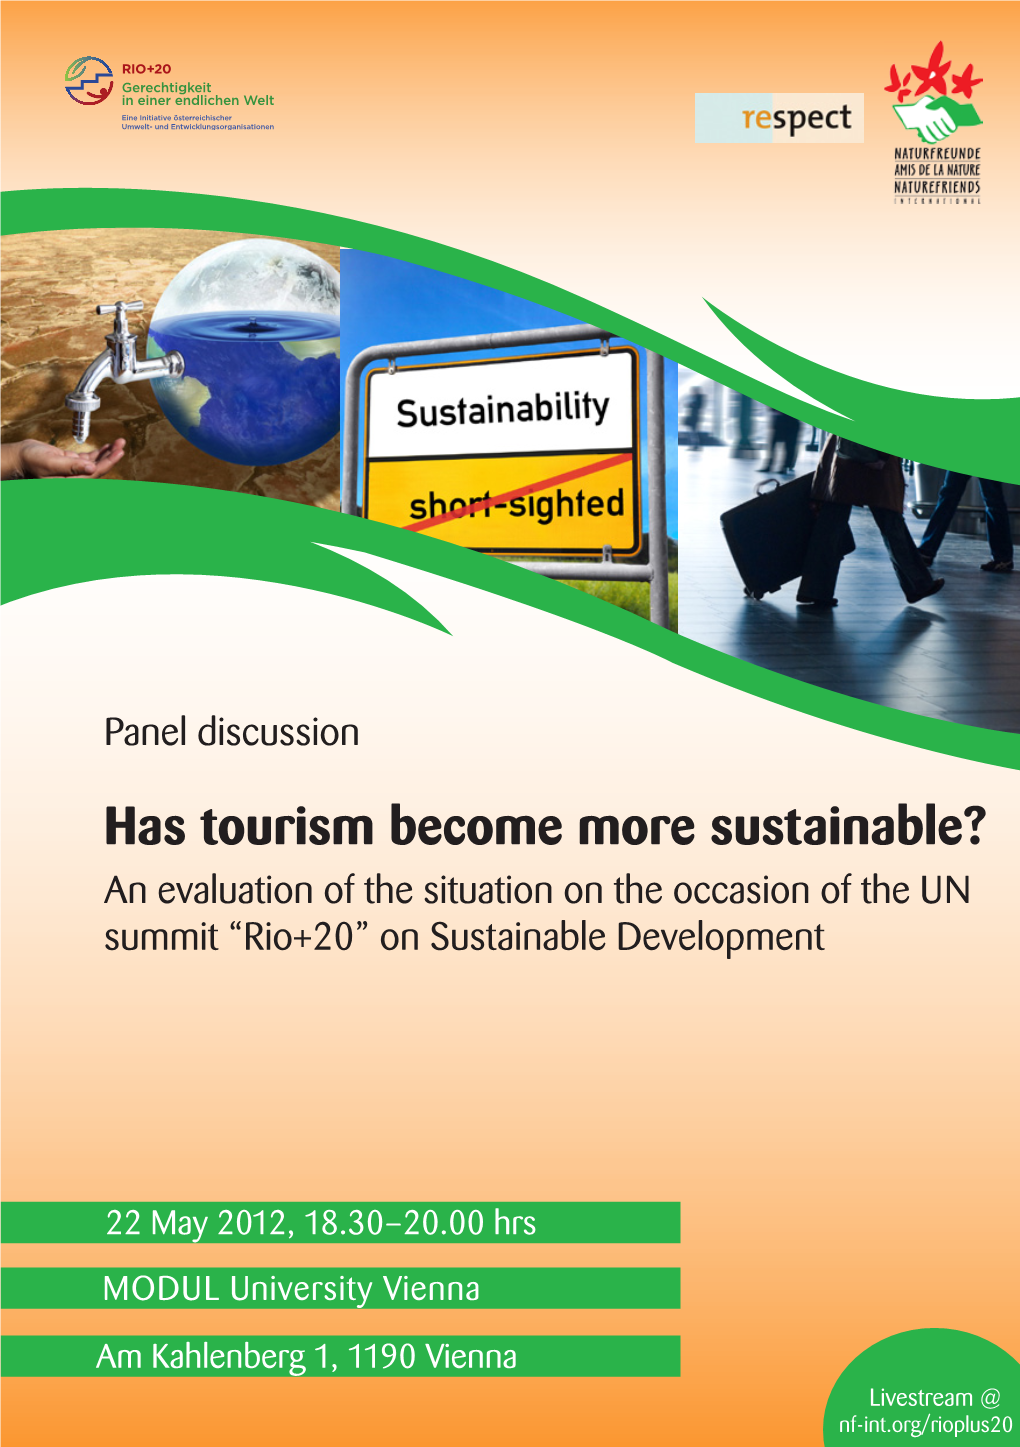 Has Tourism Become More Sustainable? an Evaluation of the Situation on the Occasion of the UN Summit “Rio+20” on Sustainable Development